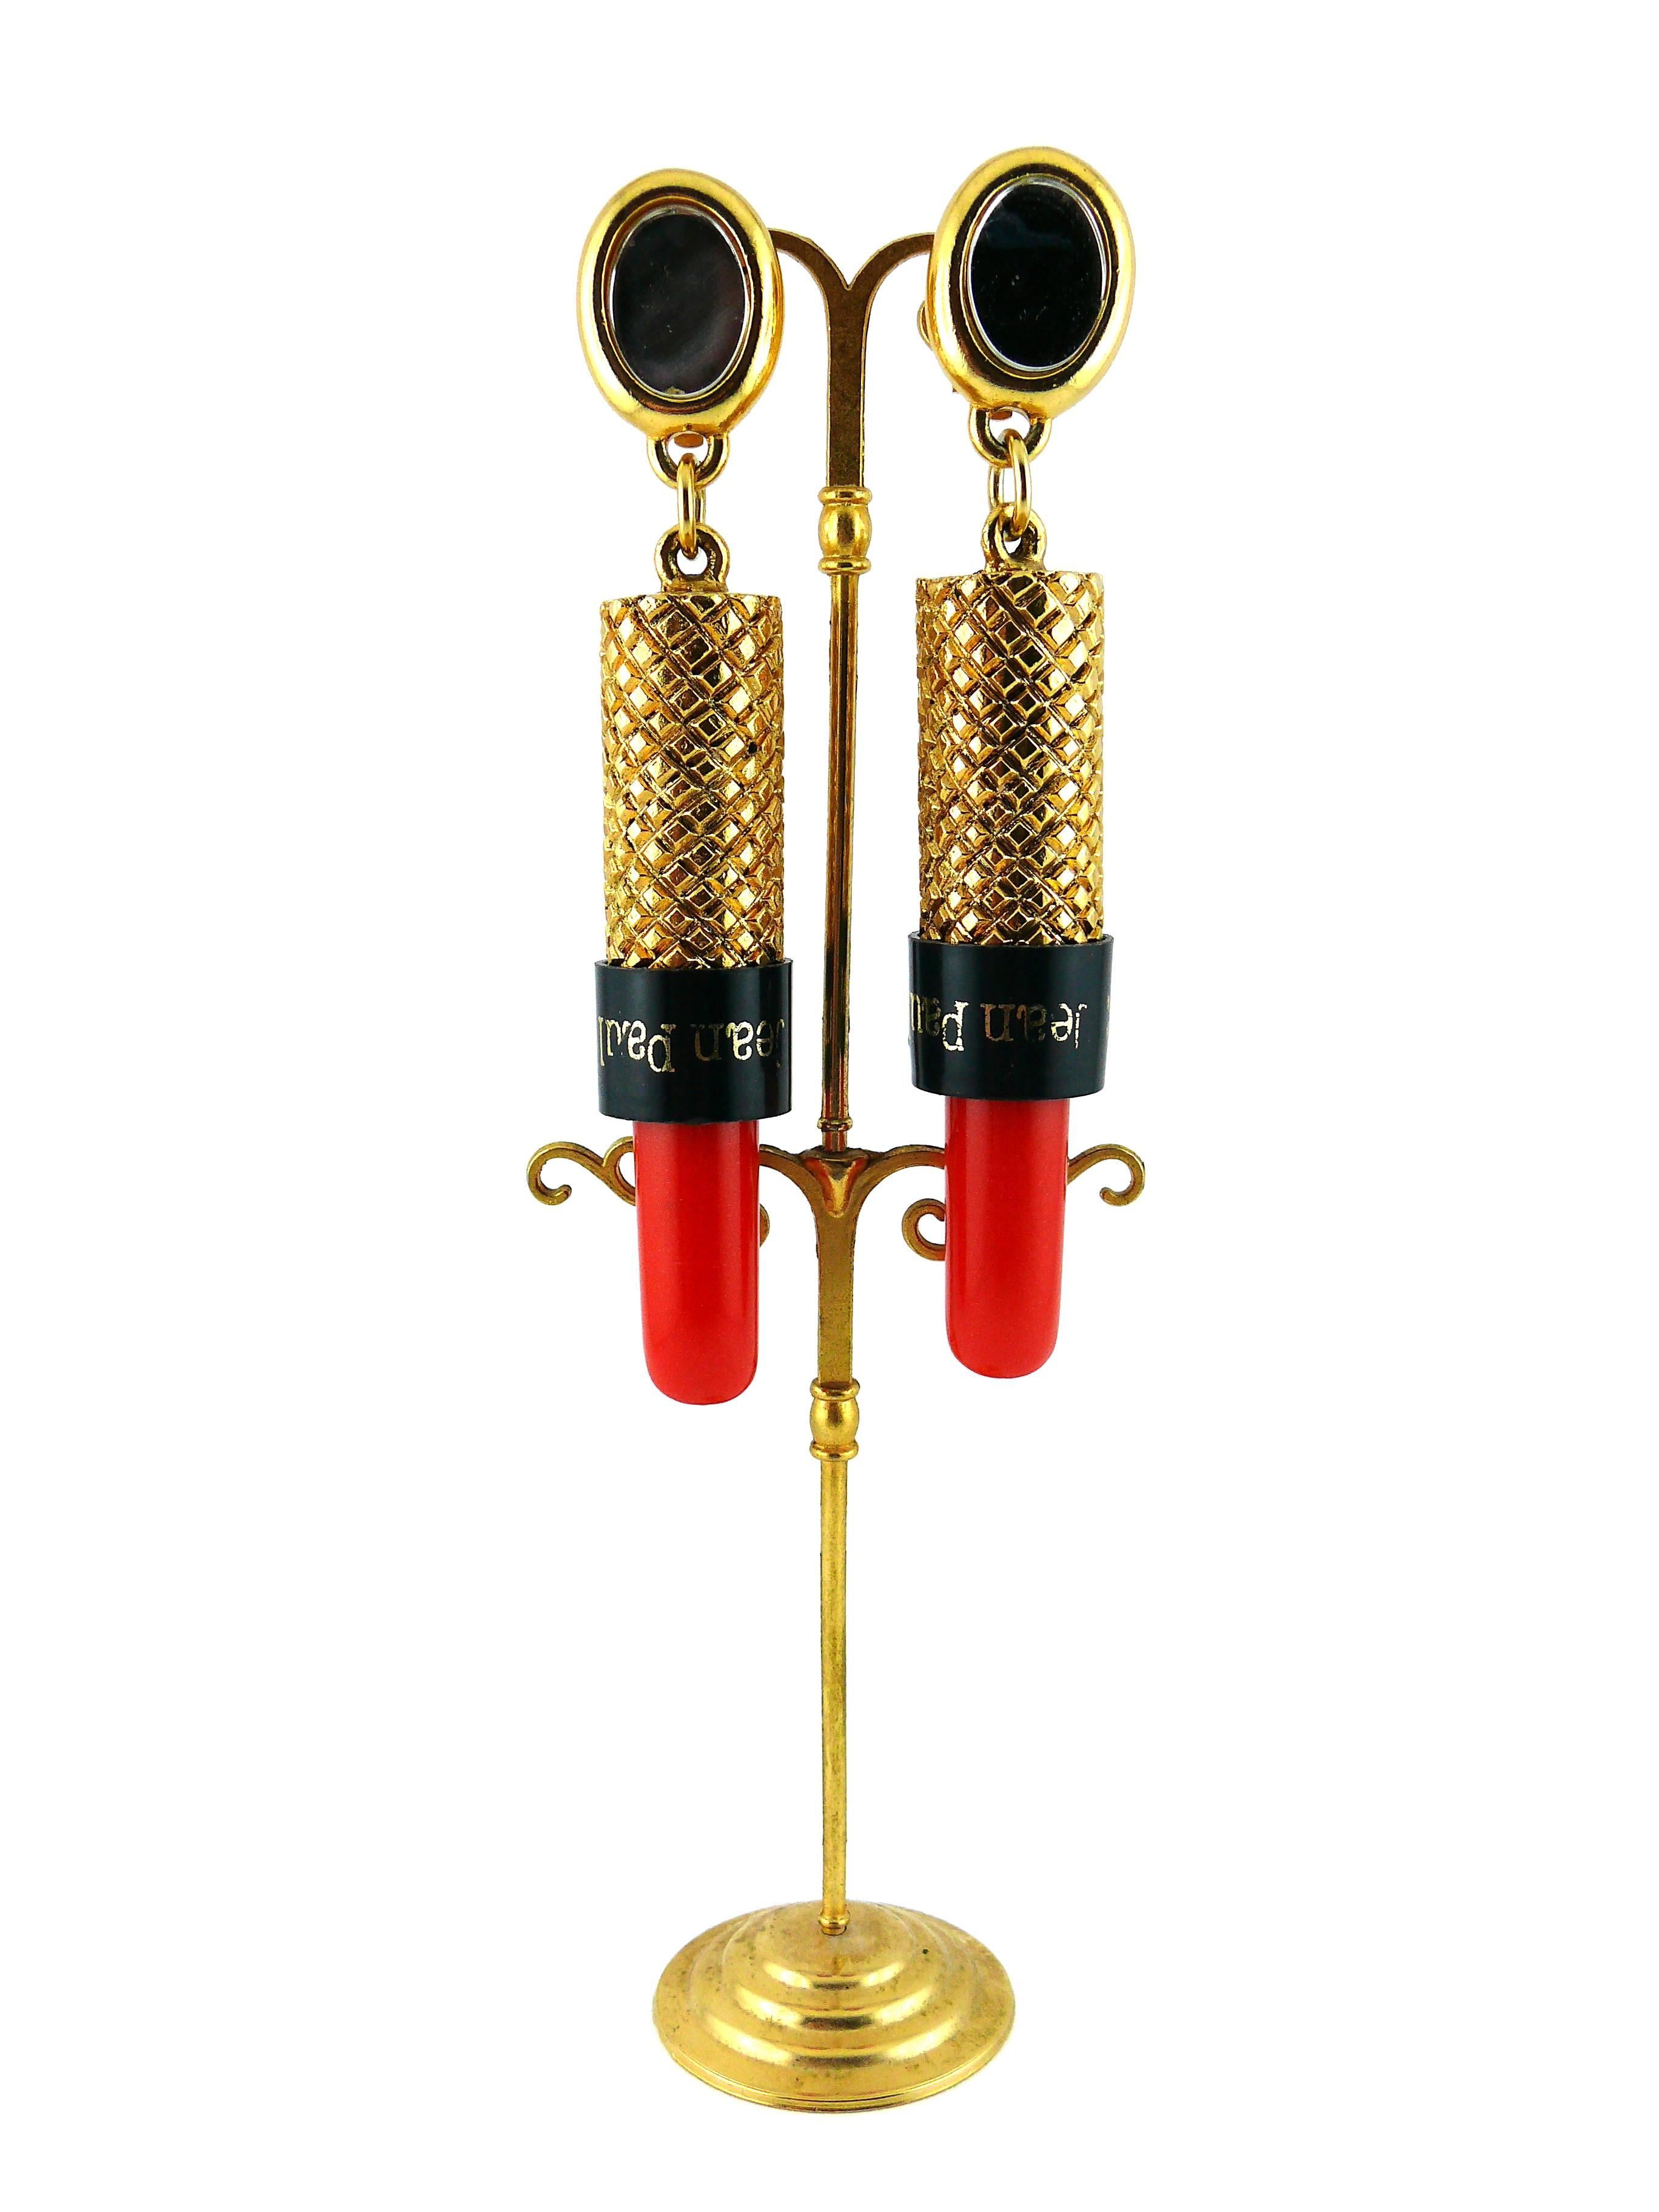 JEAN PAUL GAULTIER vintage dangling earrings featuring a lipstick topped by an oval mirror.

Marked Jean Paul Gaultier.

Note
As a buyer, you are fully responsible for customs duties, other local taxes and any administrative procedures related